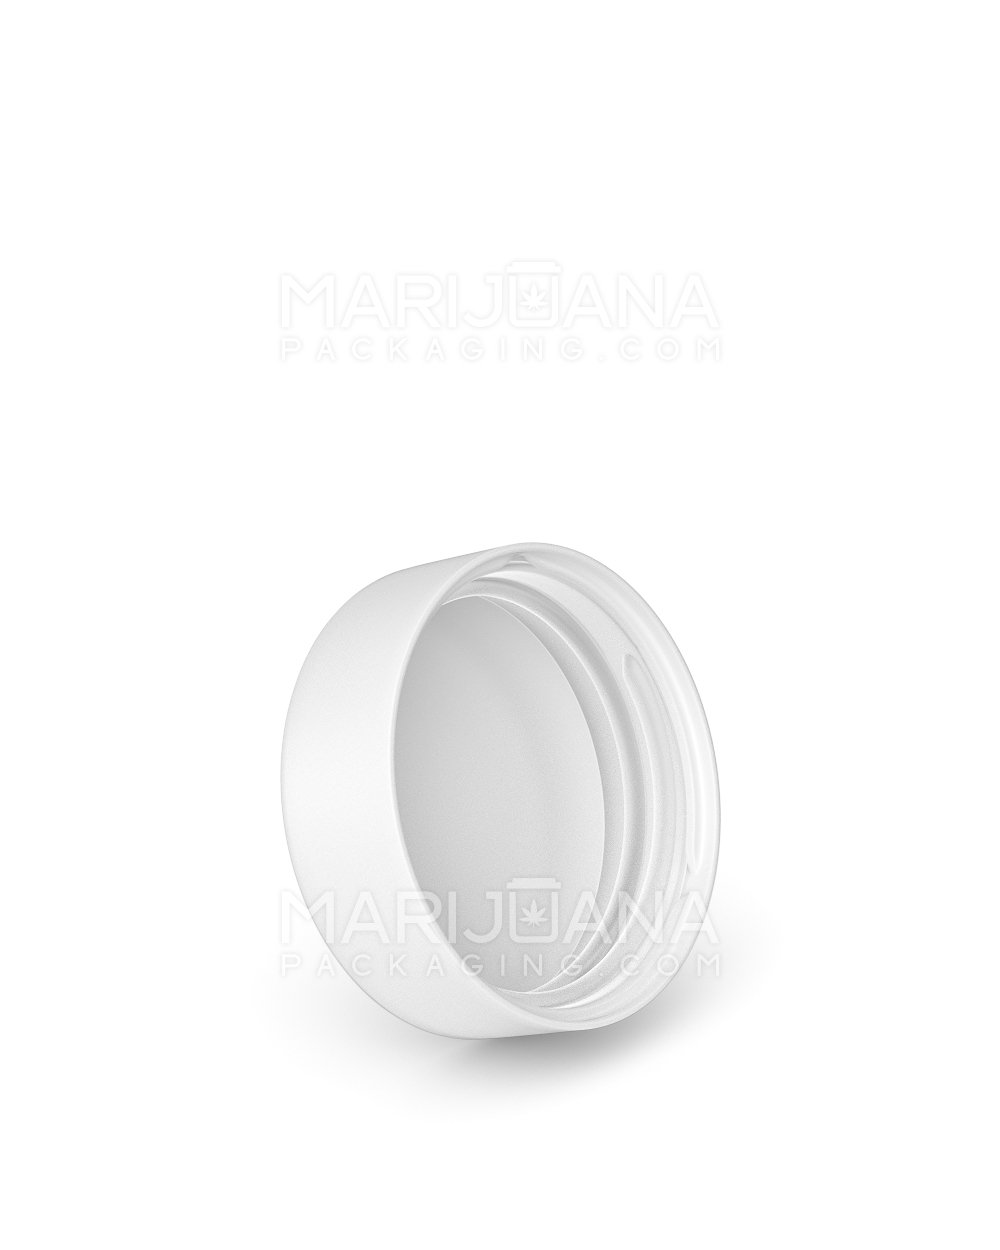 Child Resistant | Smooth Push Down & Turn Plastic Caps w/ Foam Liner | 38mm - Matte White - 288 Count - 2